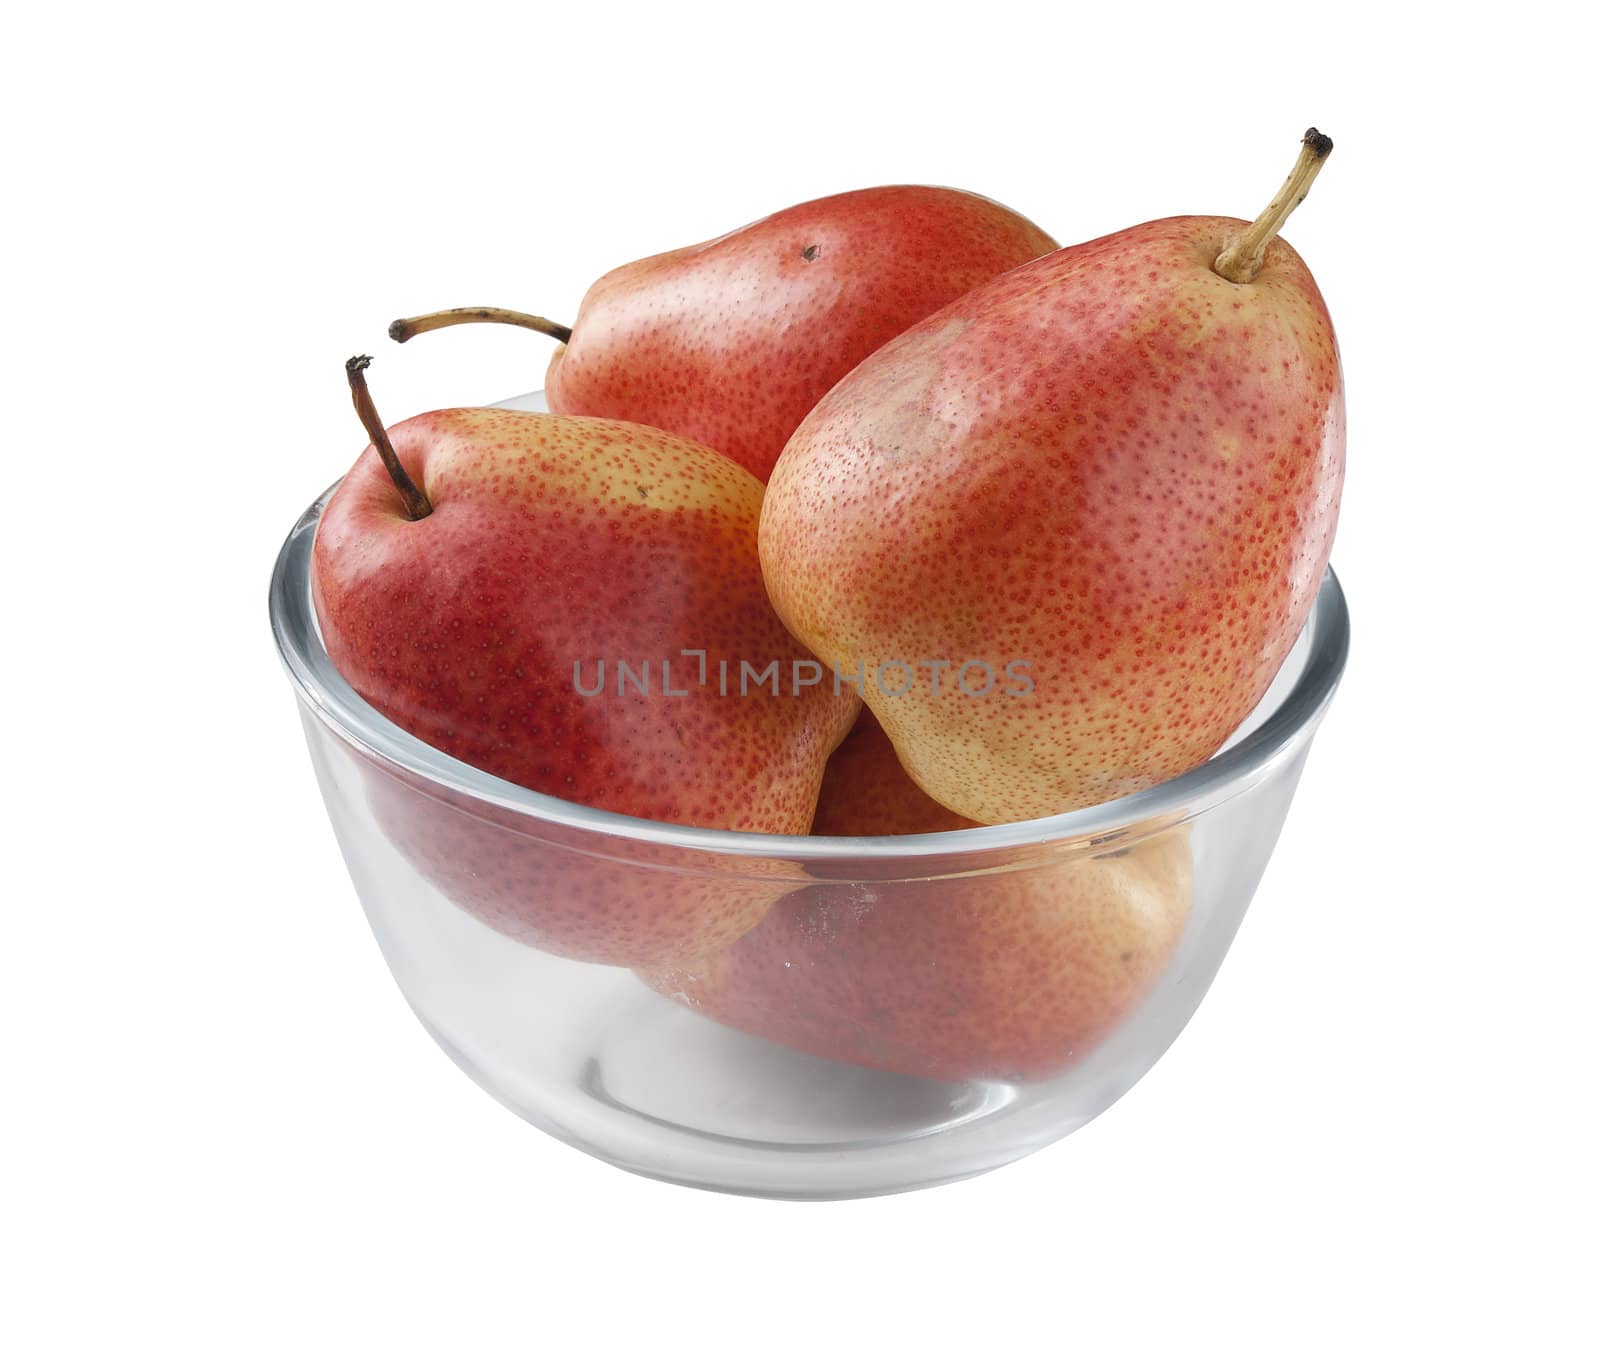 Some red pears in the glass bowl